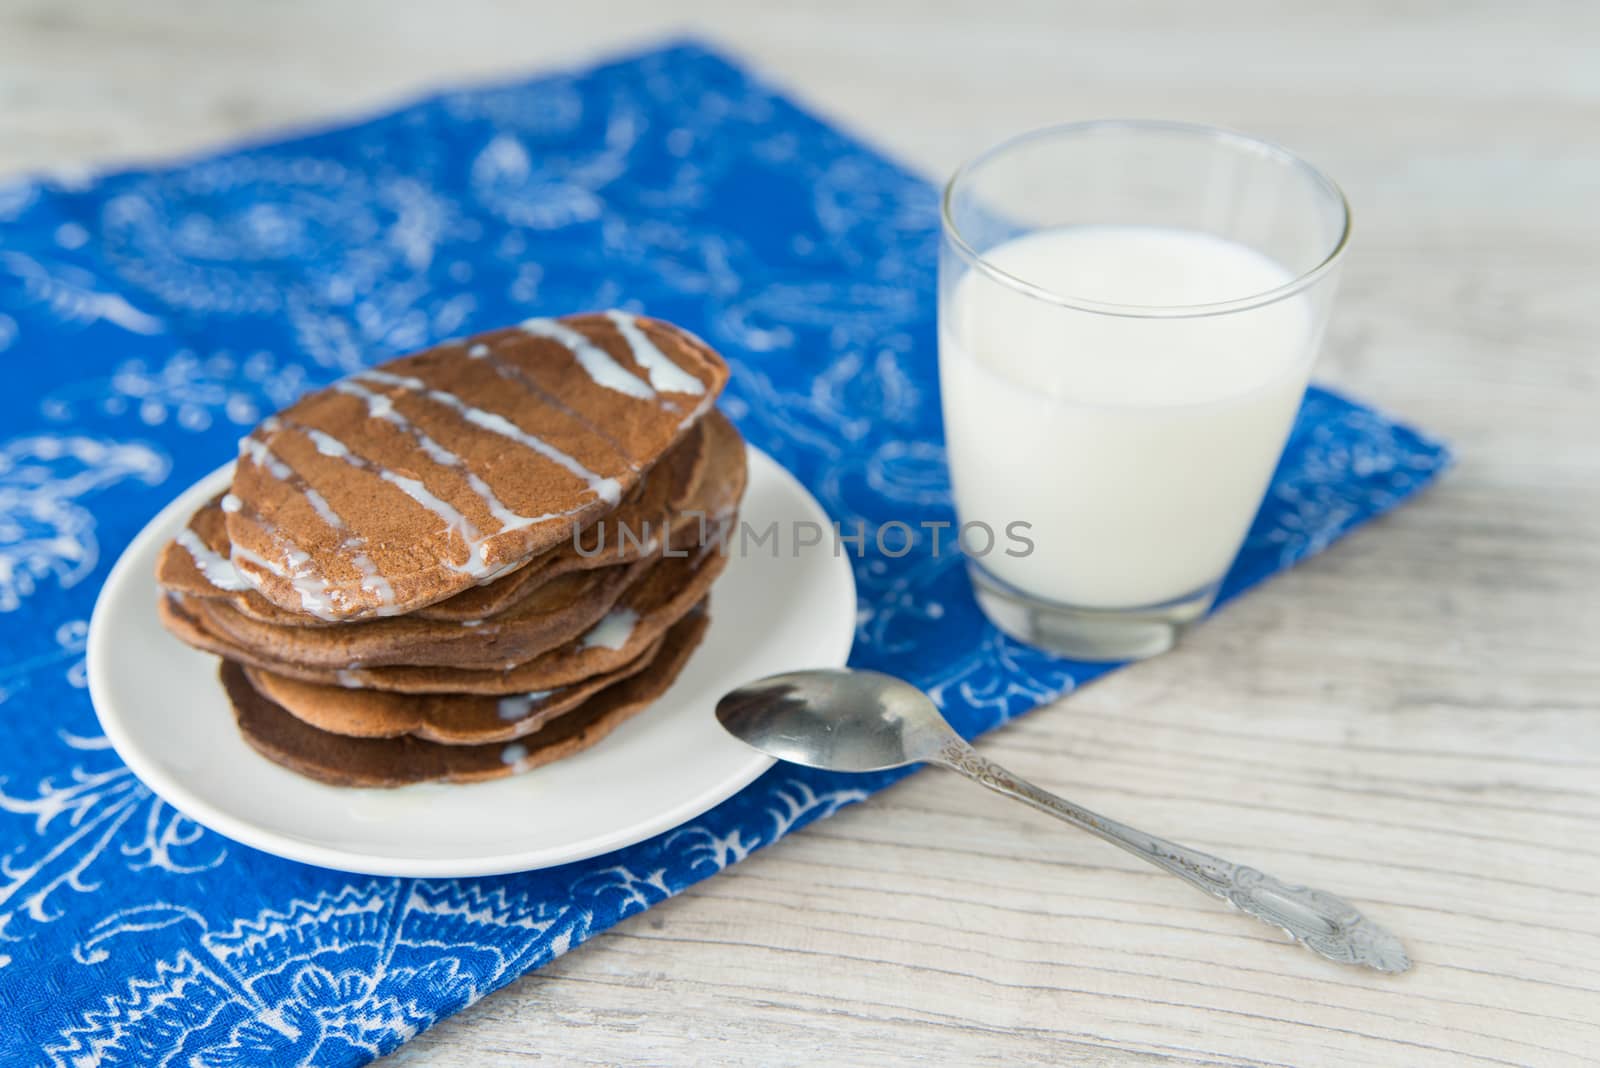 Chocolate pancakes with the glass of milk on the blue napkin